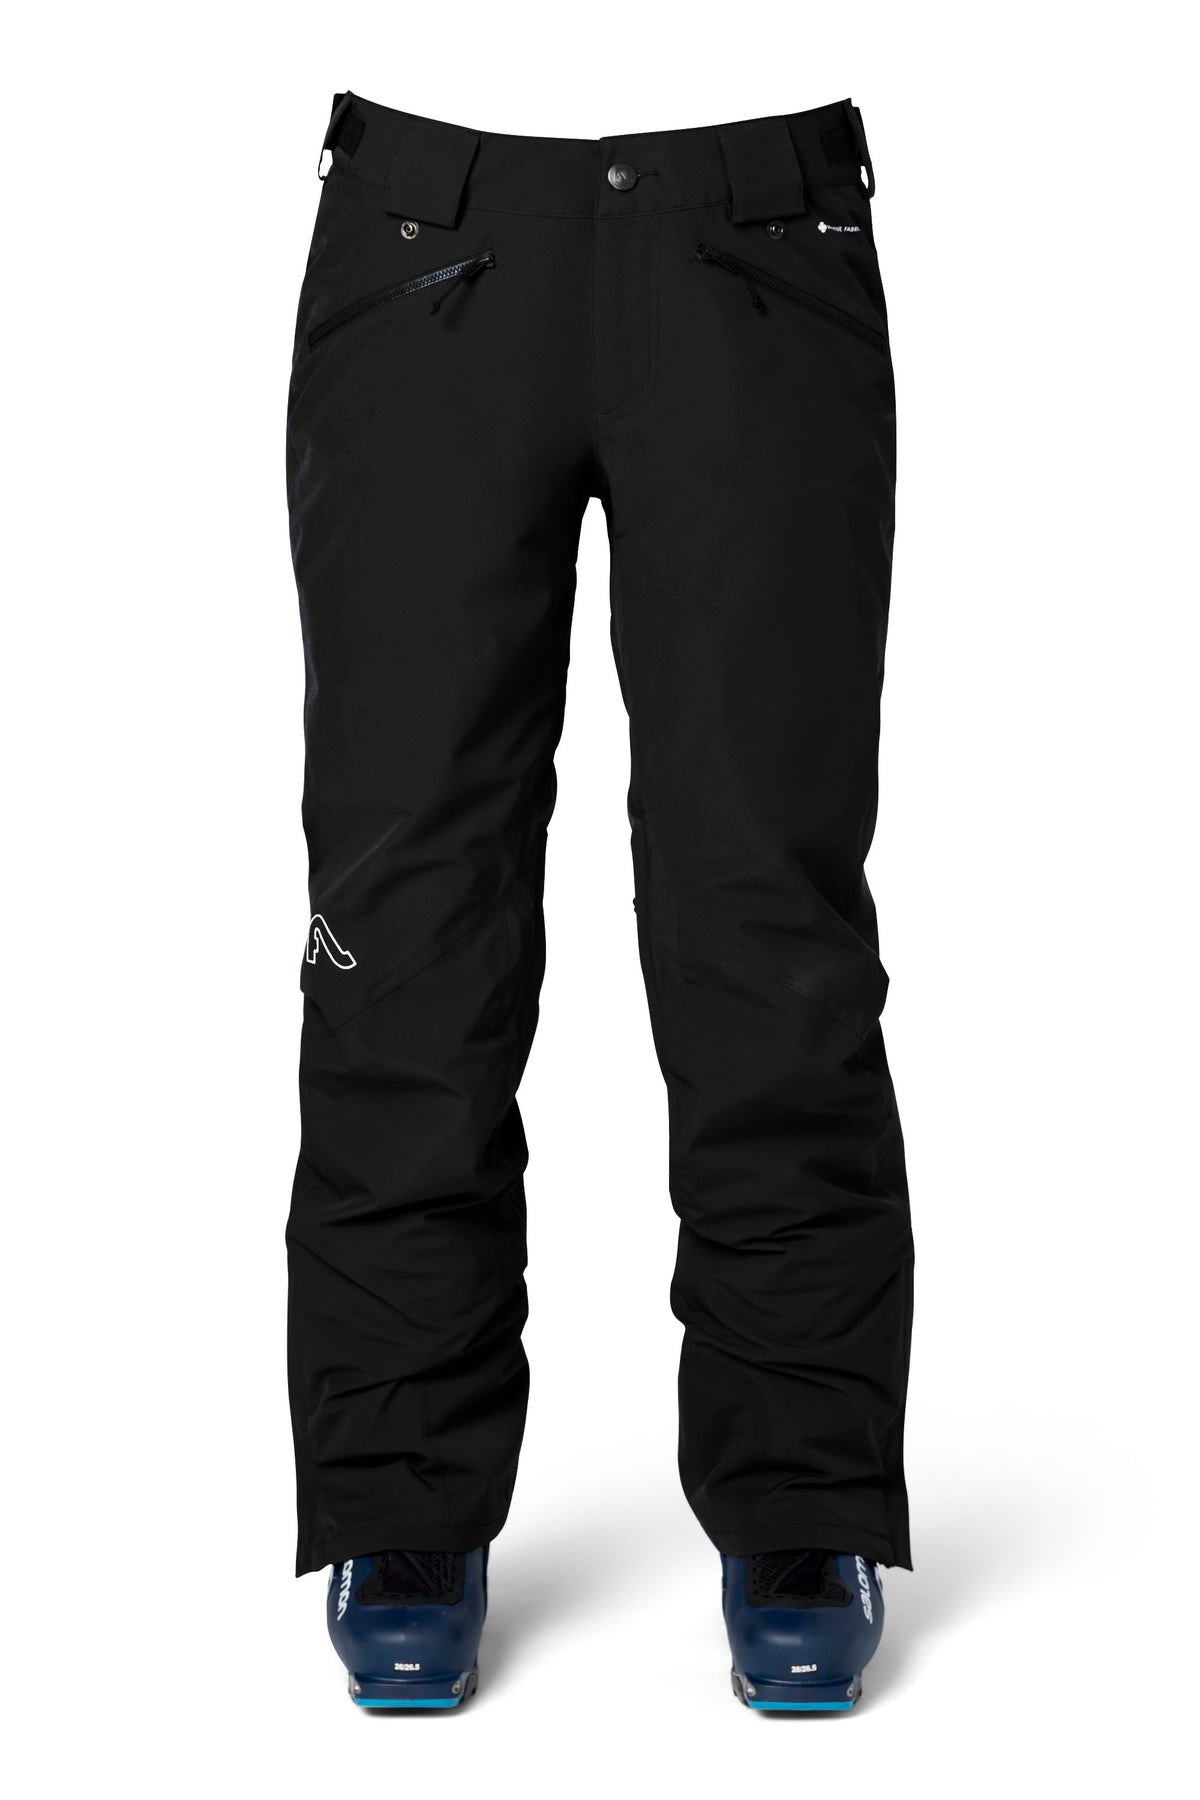 Flylow Daisy Womens Insulated Pant